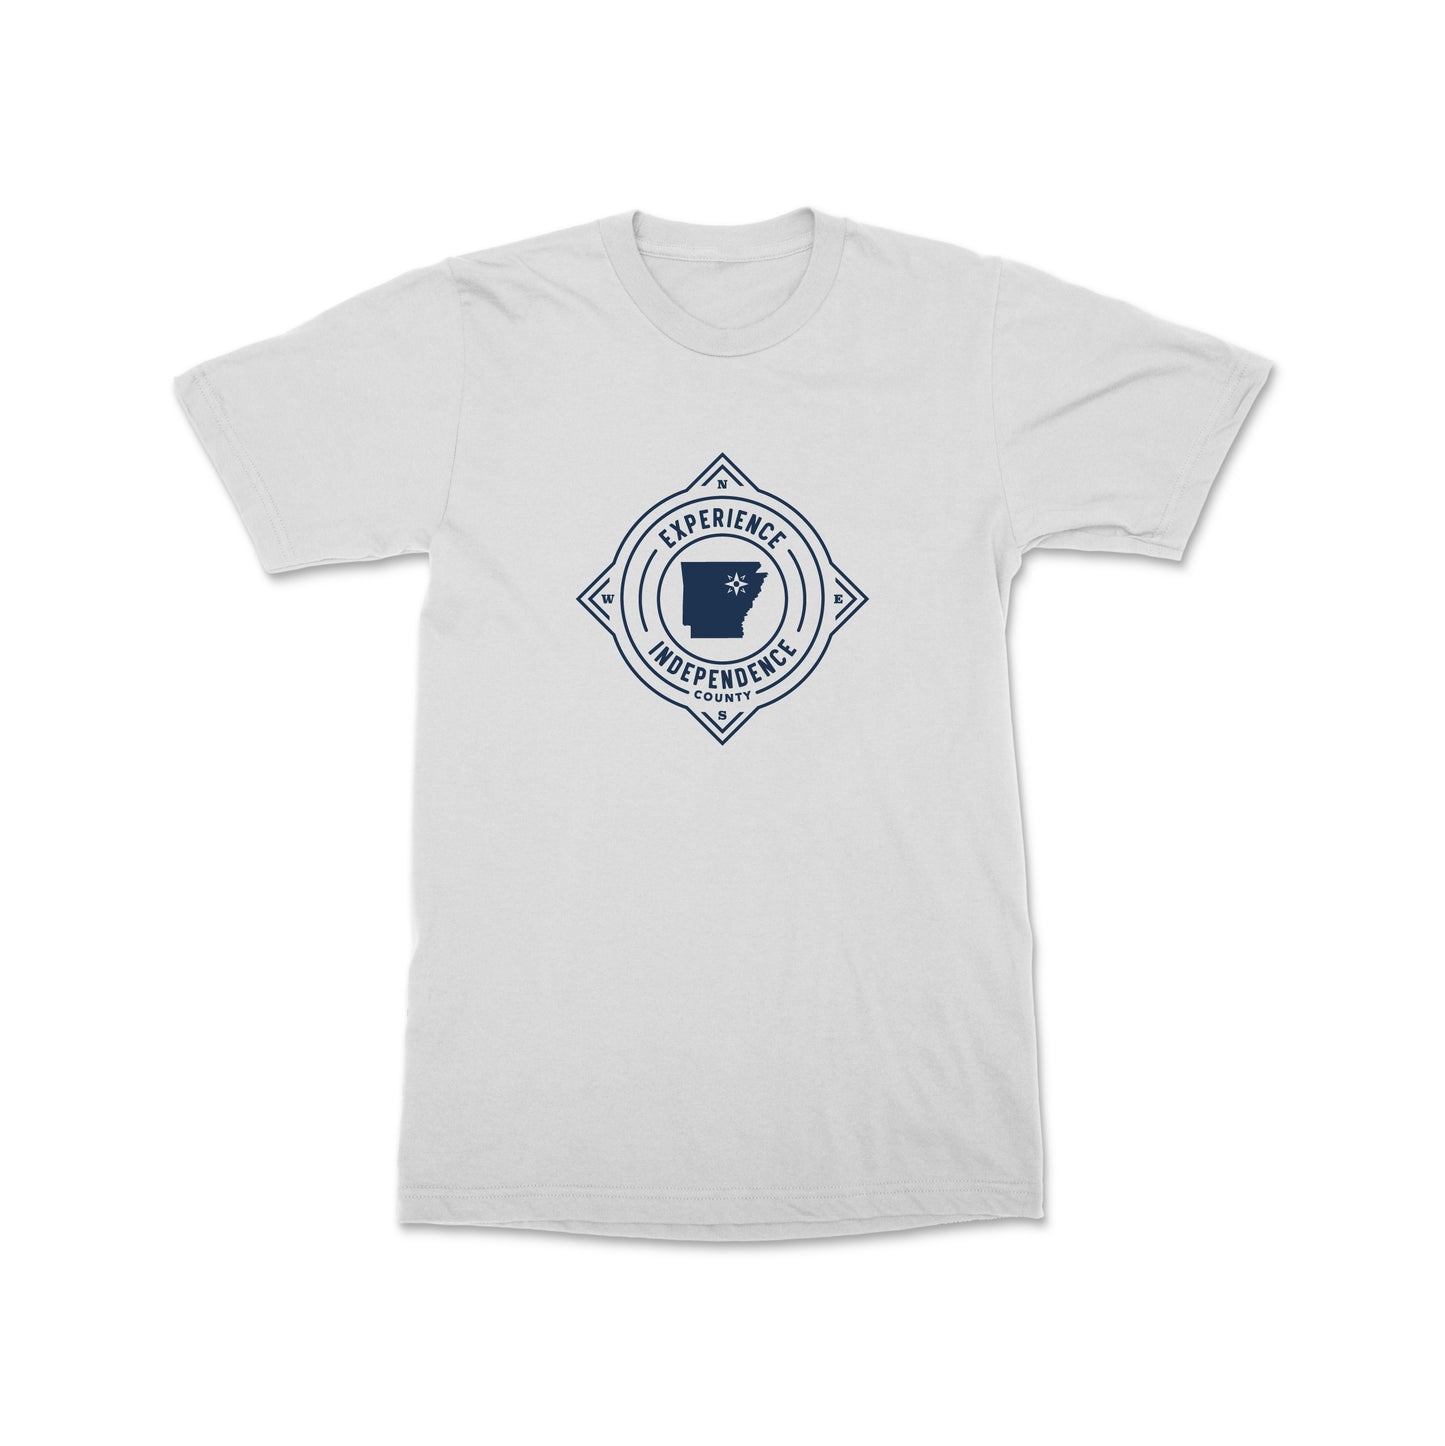 Experience Independence Logo Tee - White